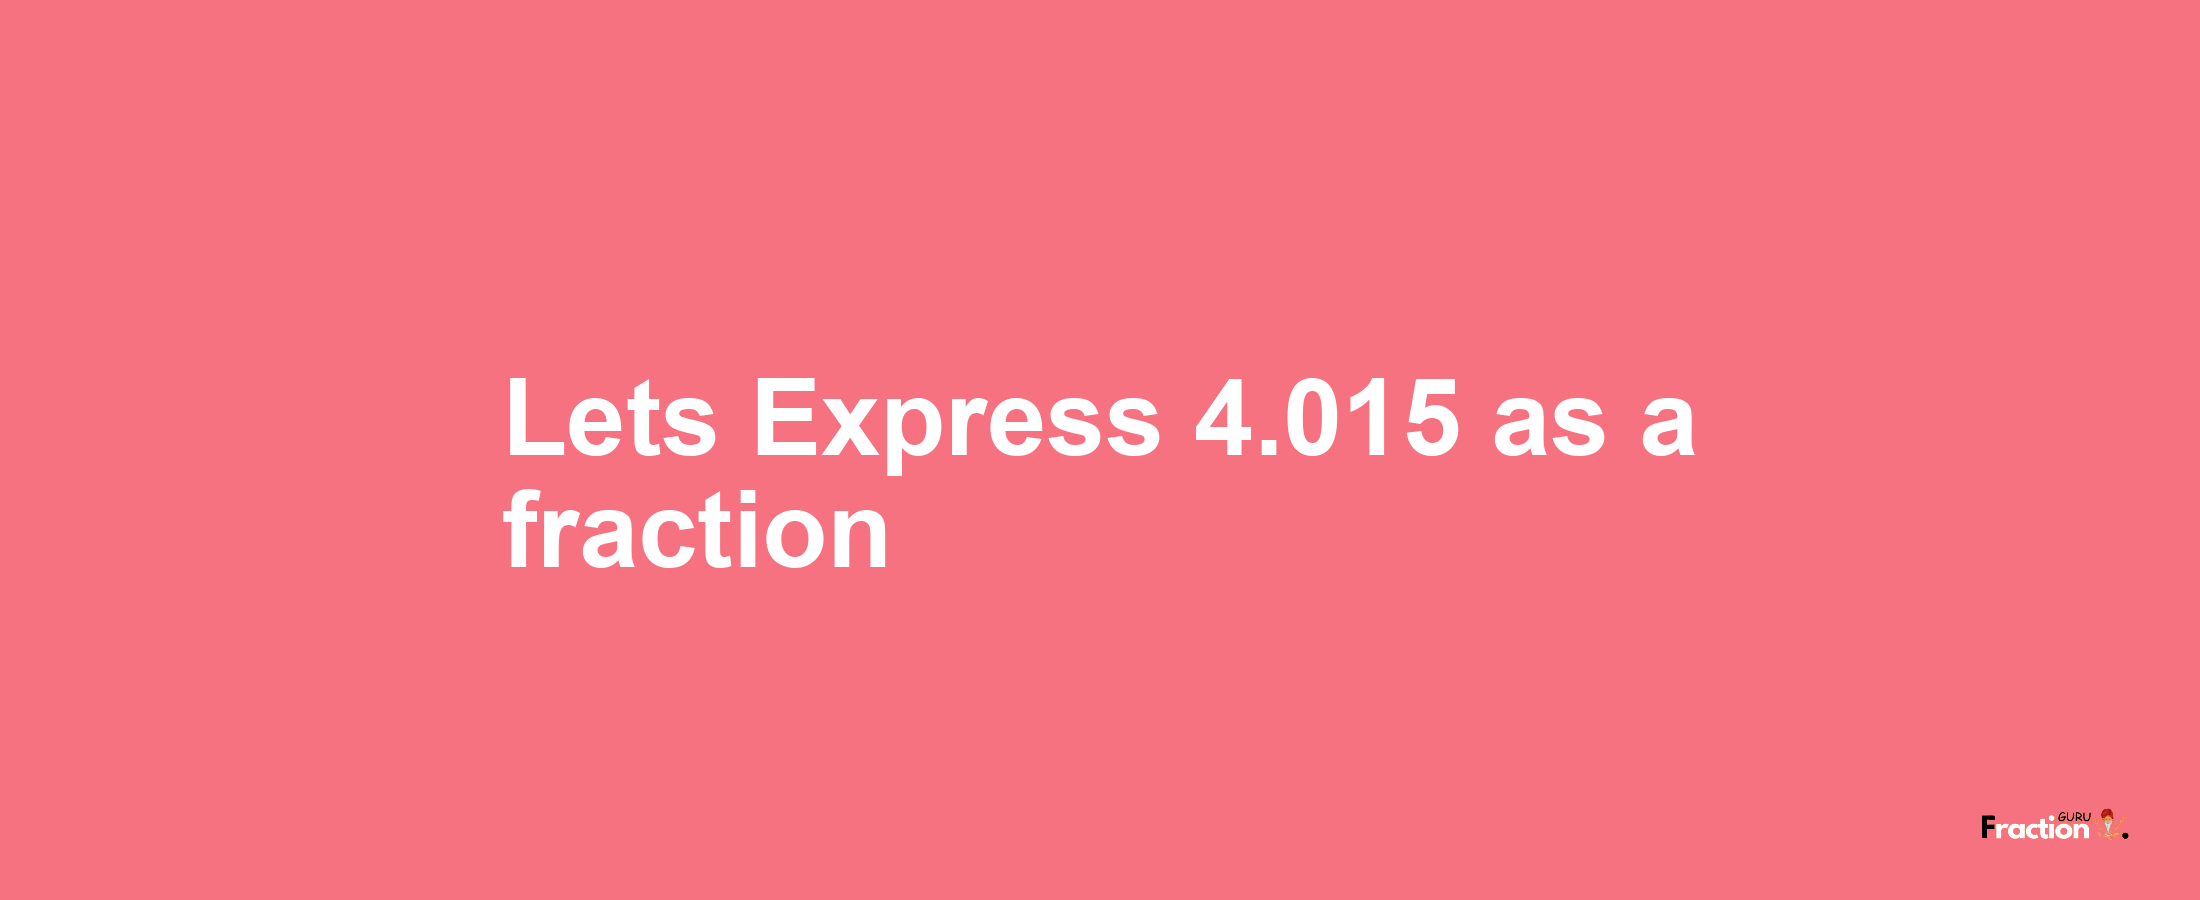 Lets Express 4.015 as afraction